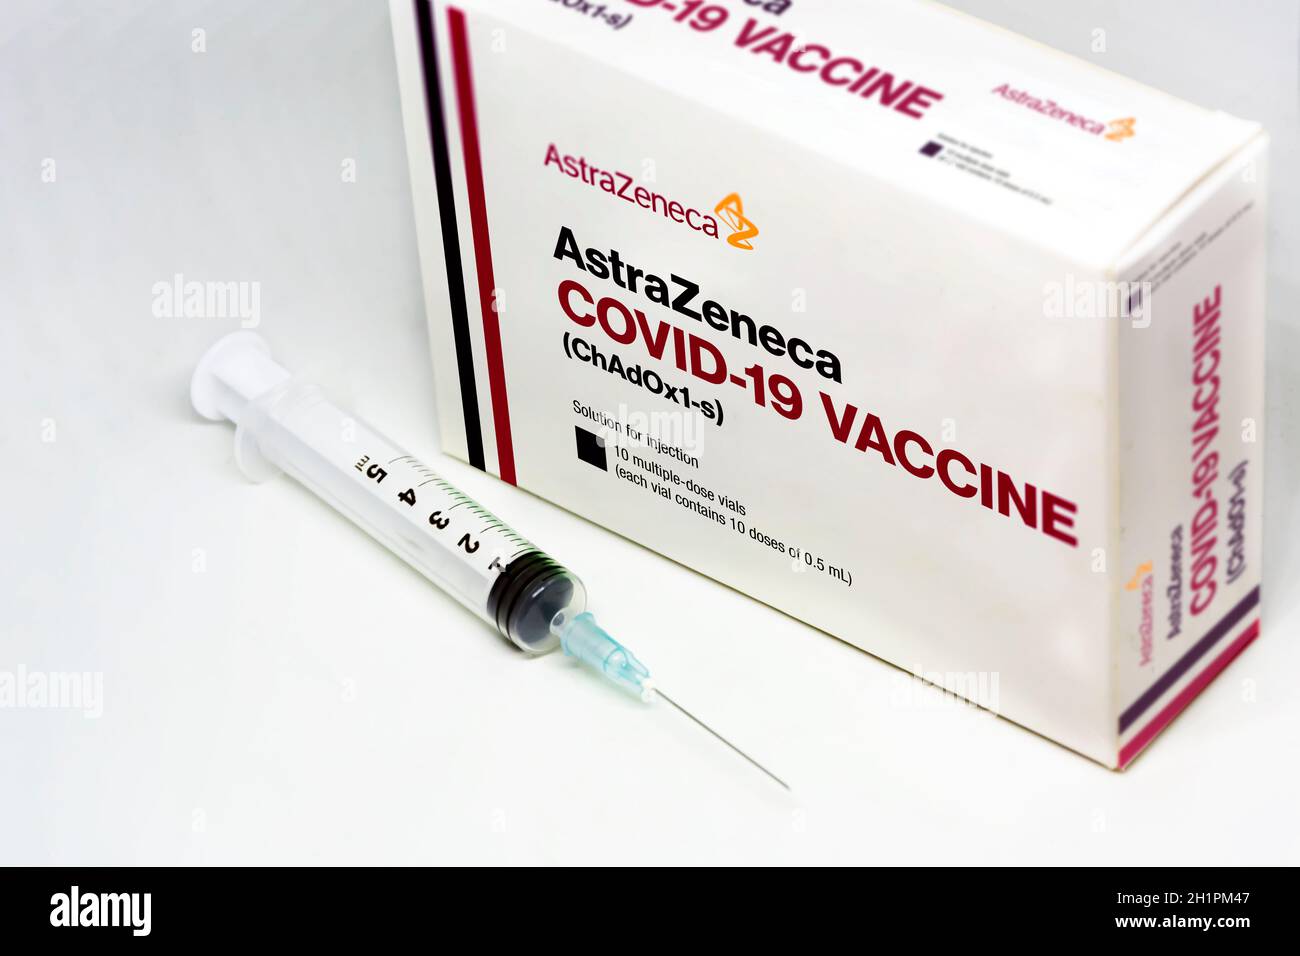 Cambridge, UK, february 5th 2021: A syringe next to the AstraZeneca Covid-19 vaccine box isolated on a white background. Health and prevention. Stock Photo